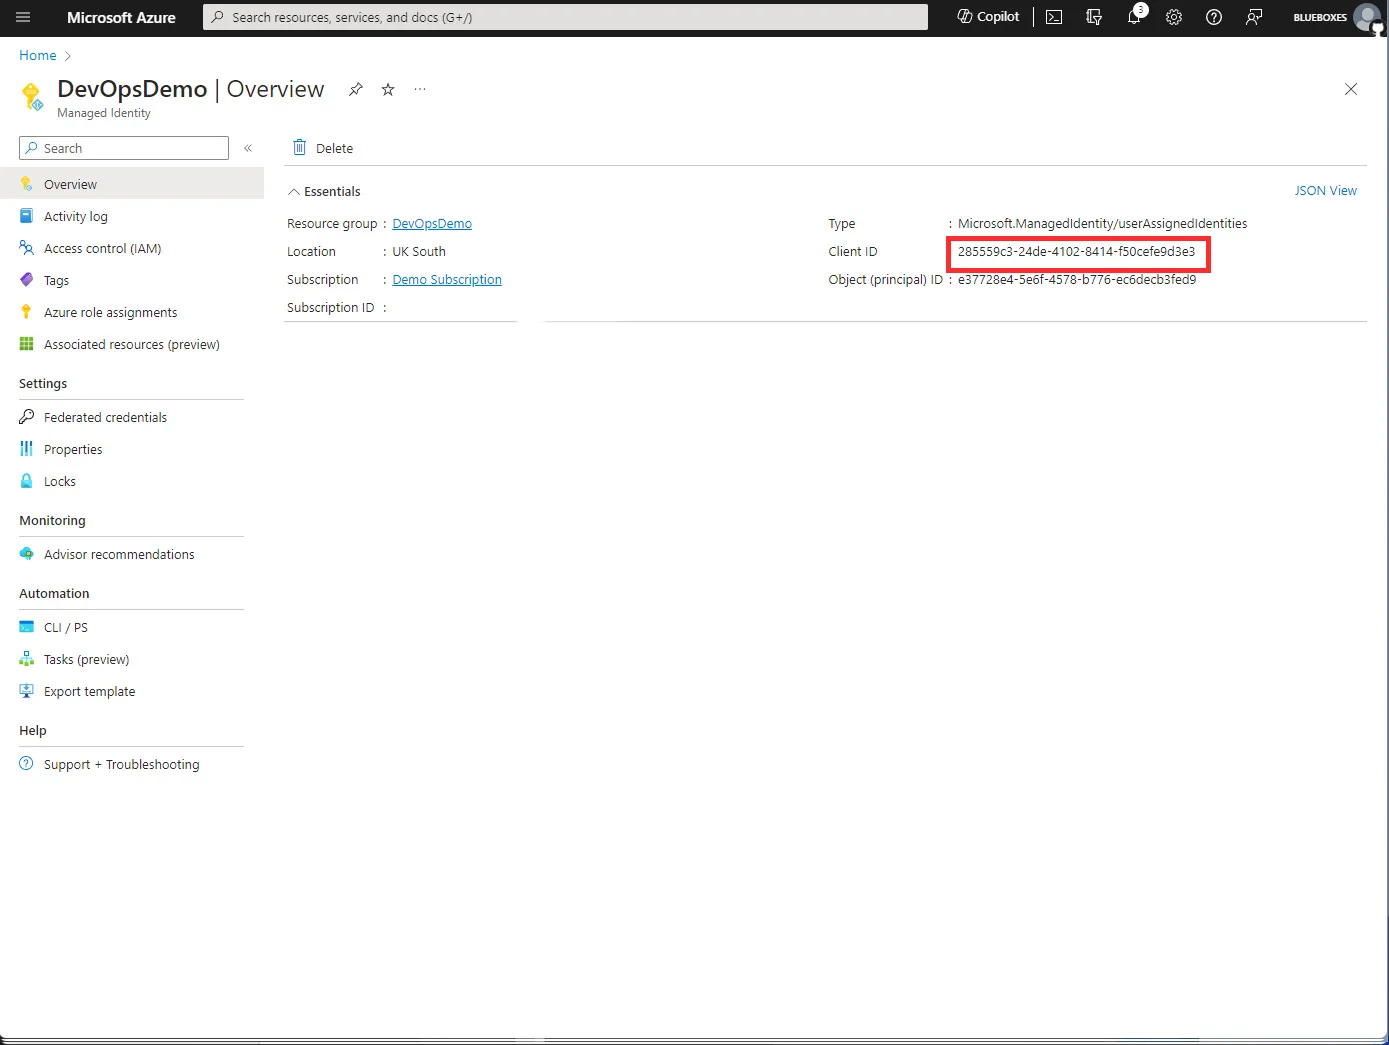 Screenshot of Azure portal showing the client ID